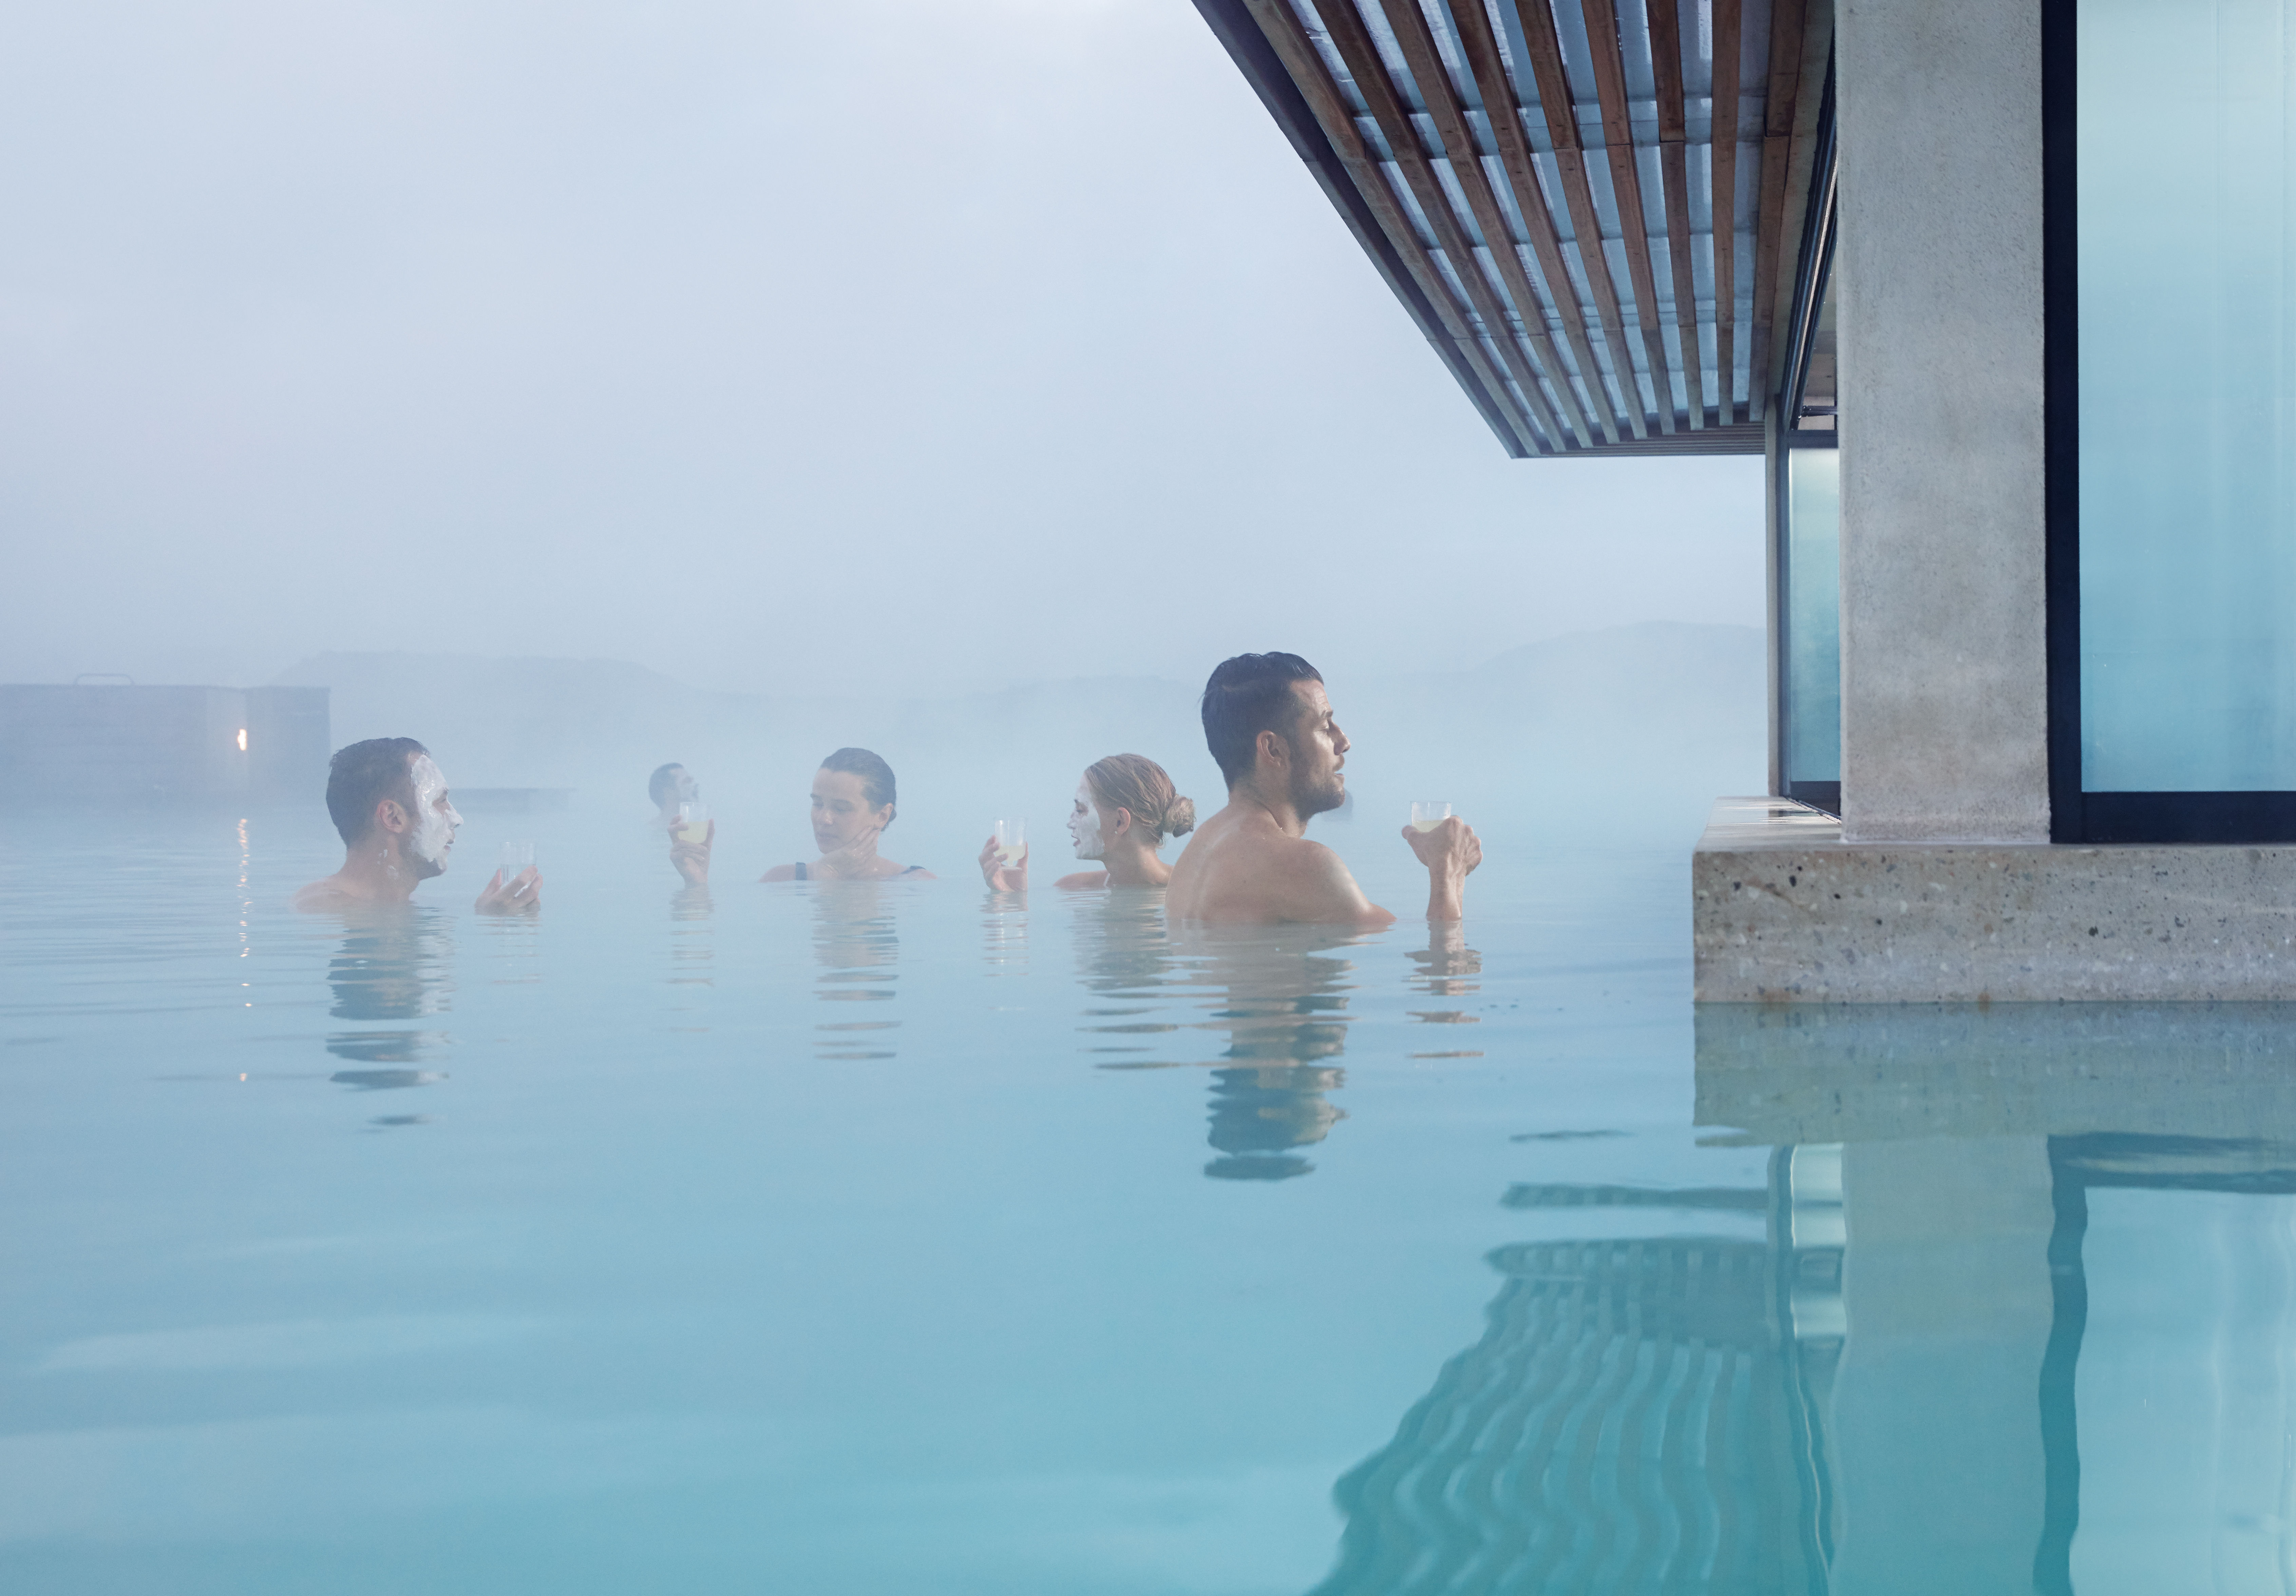 Guests enjoying their time in the Blue Lagoon